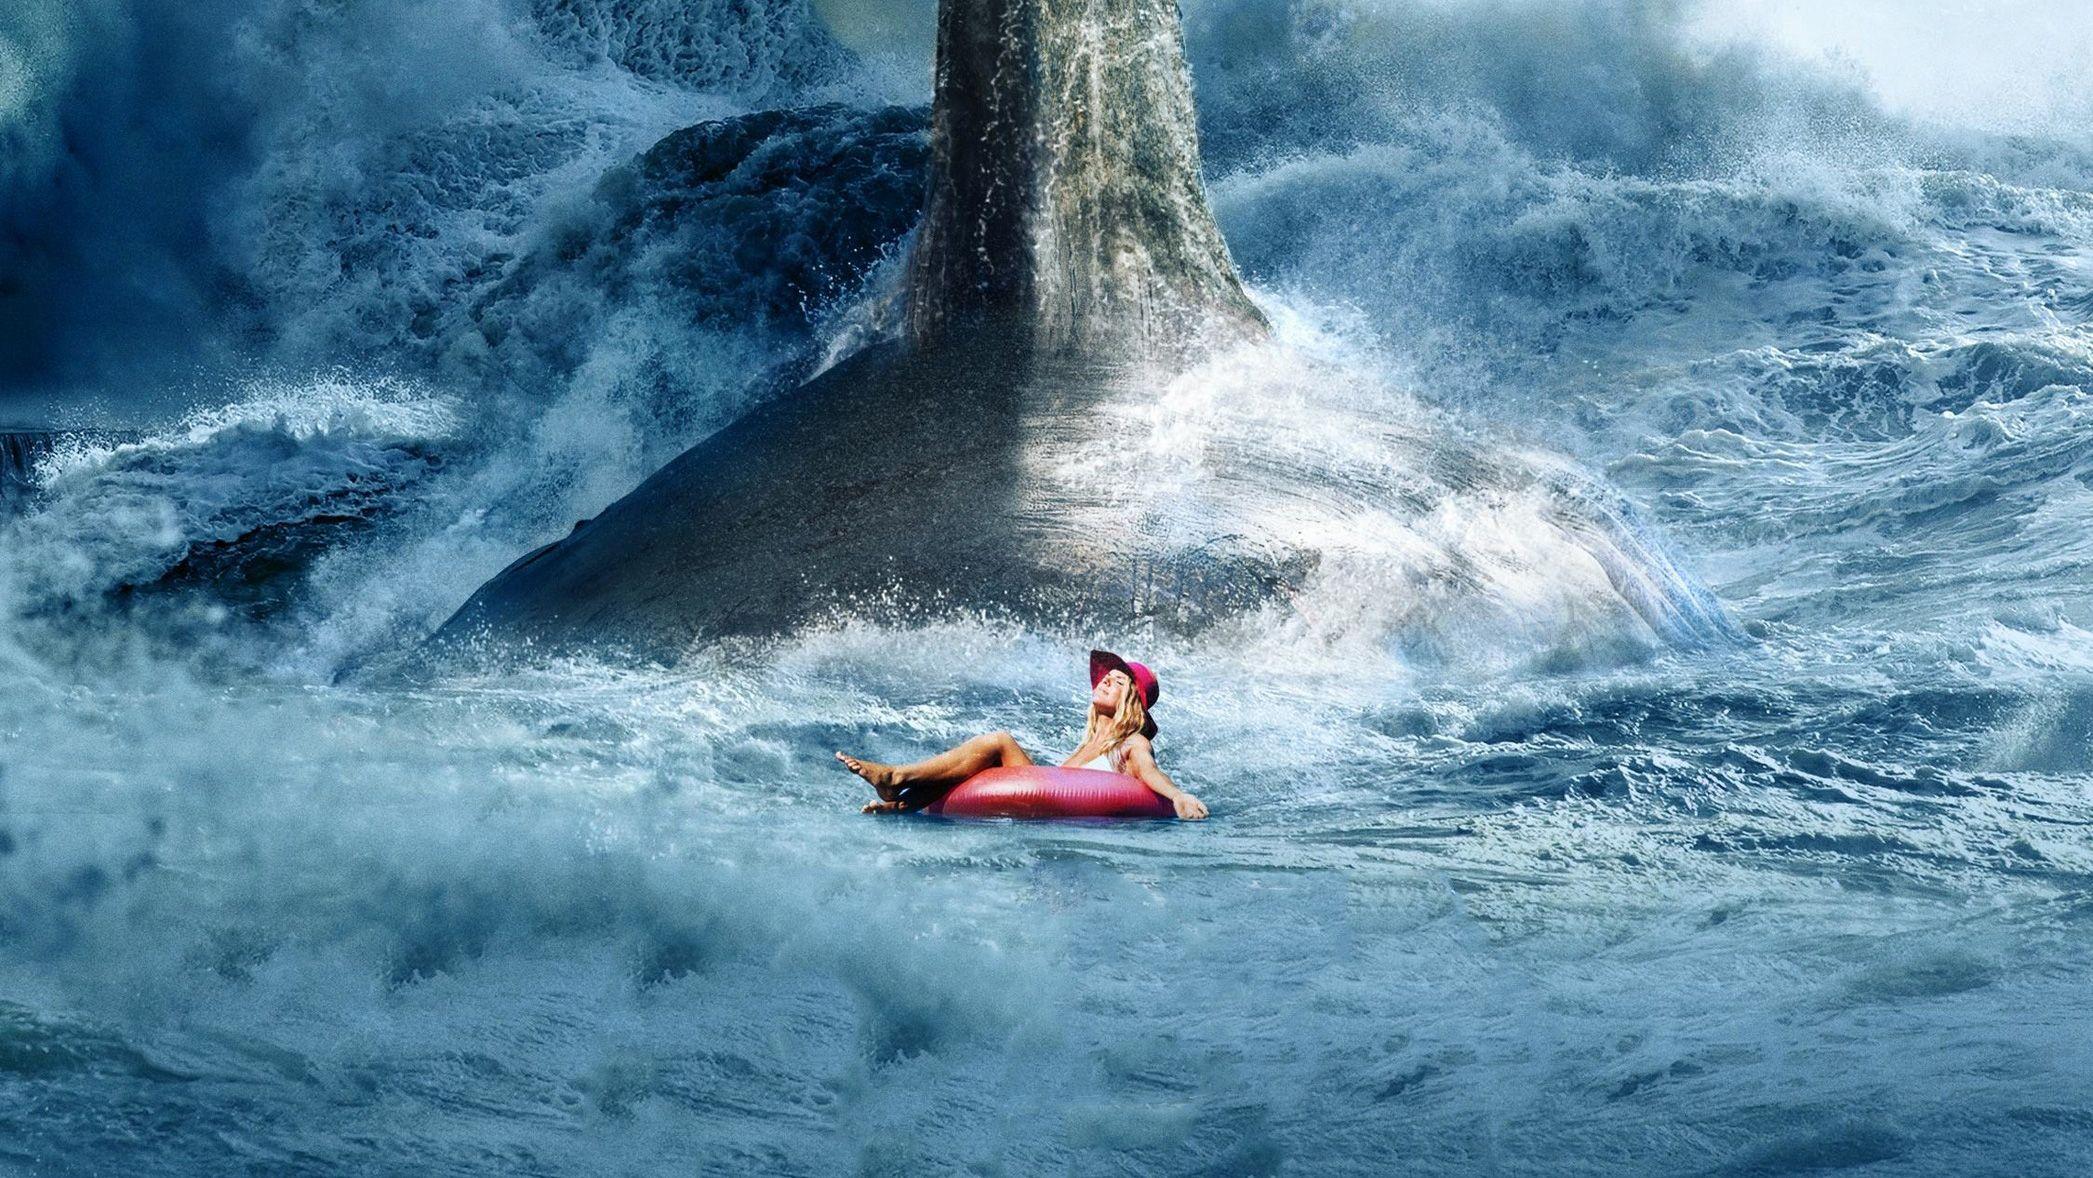 The Meg Movie HD Movies, 4k Wallpaper, Image, Background